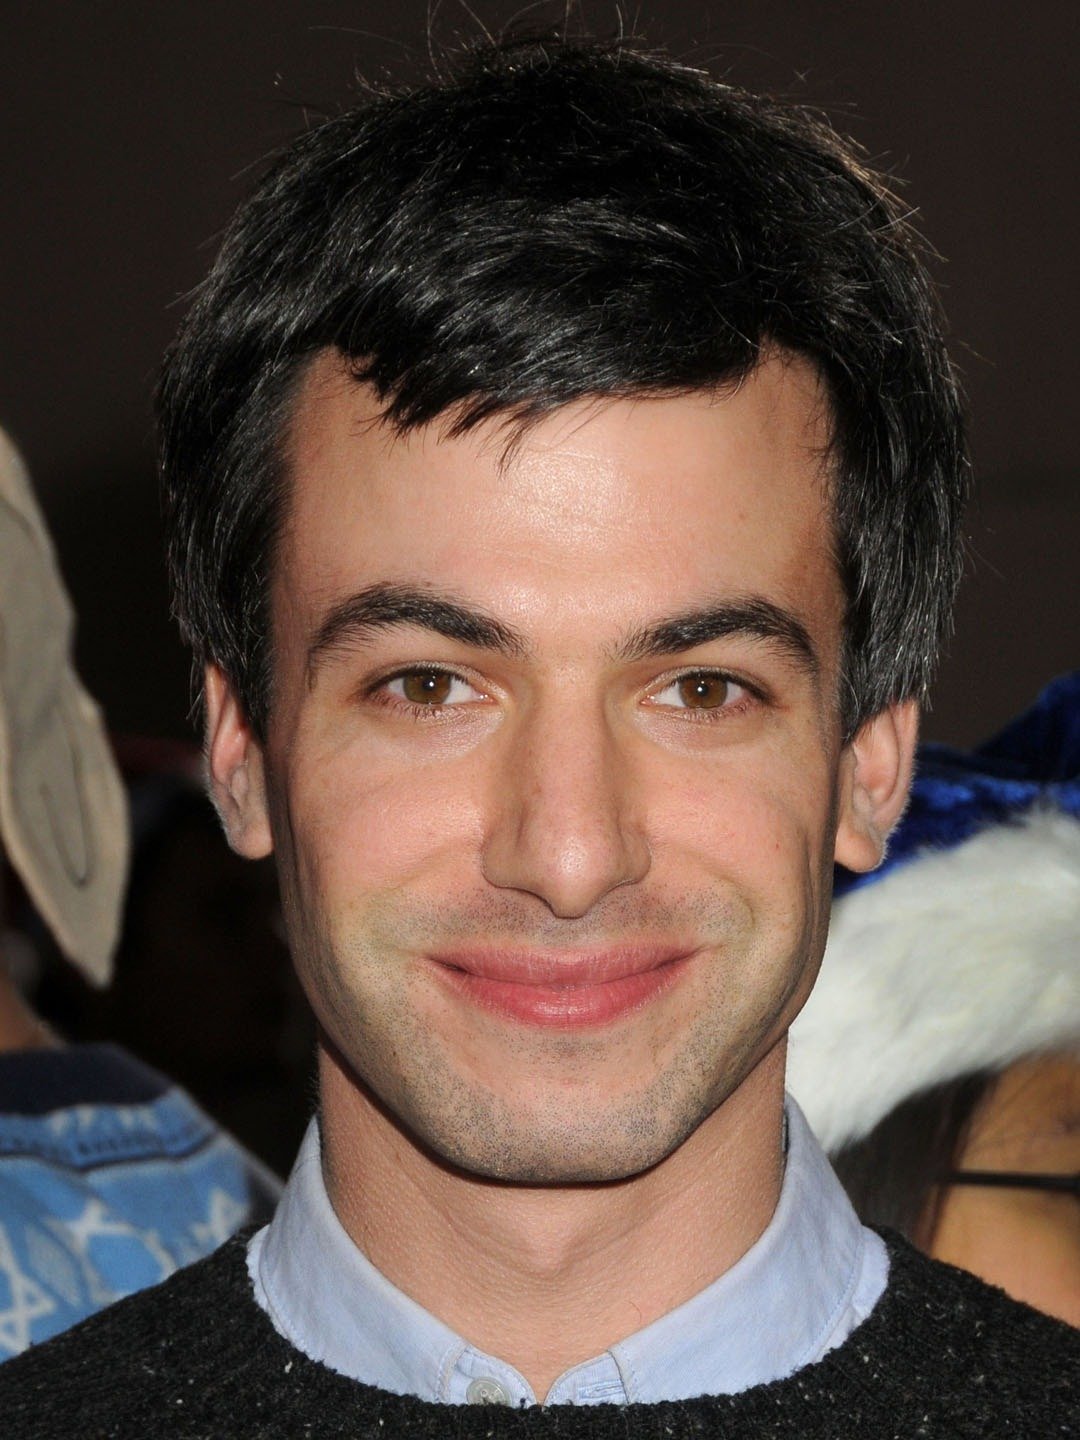 nathan for you season 3 release date